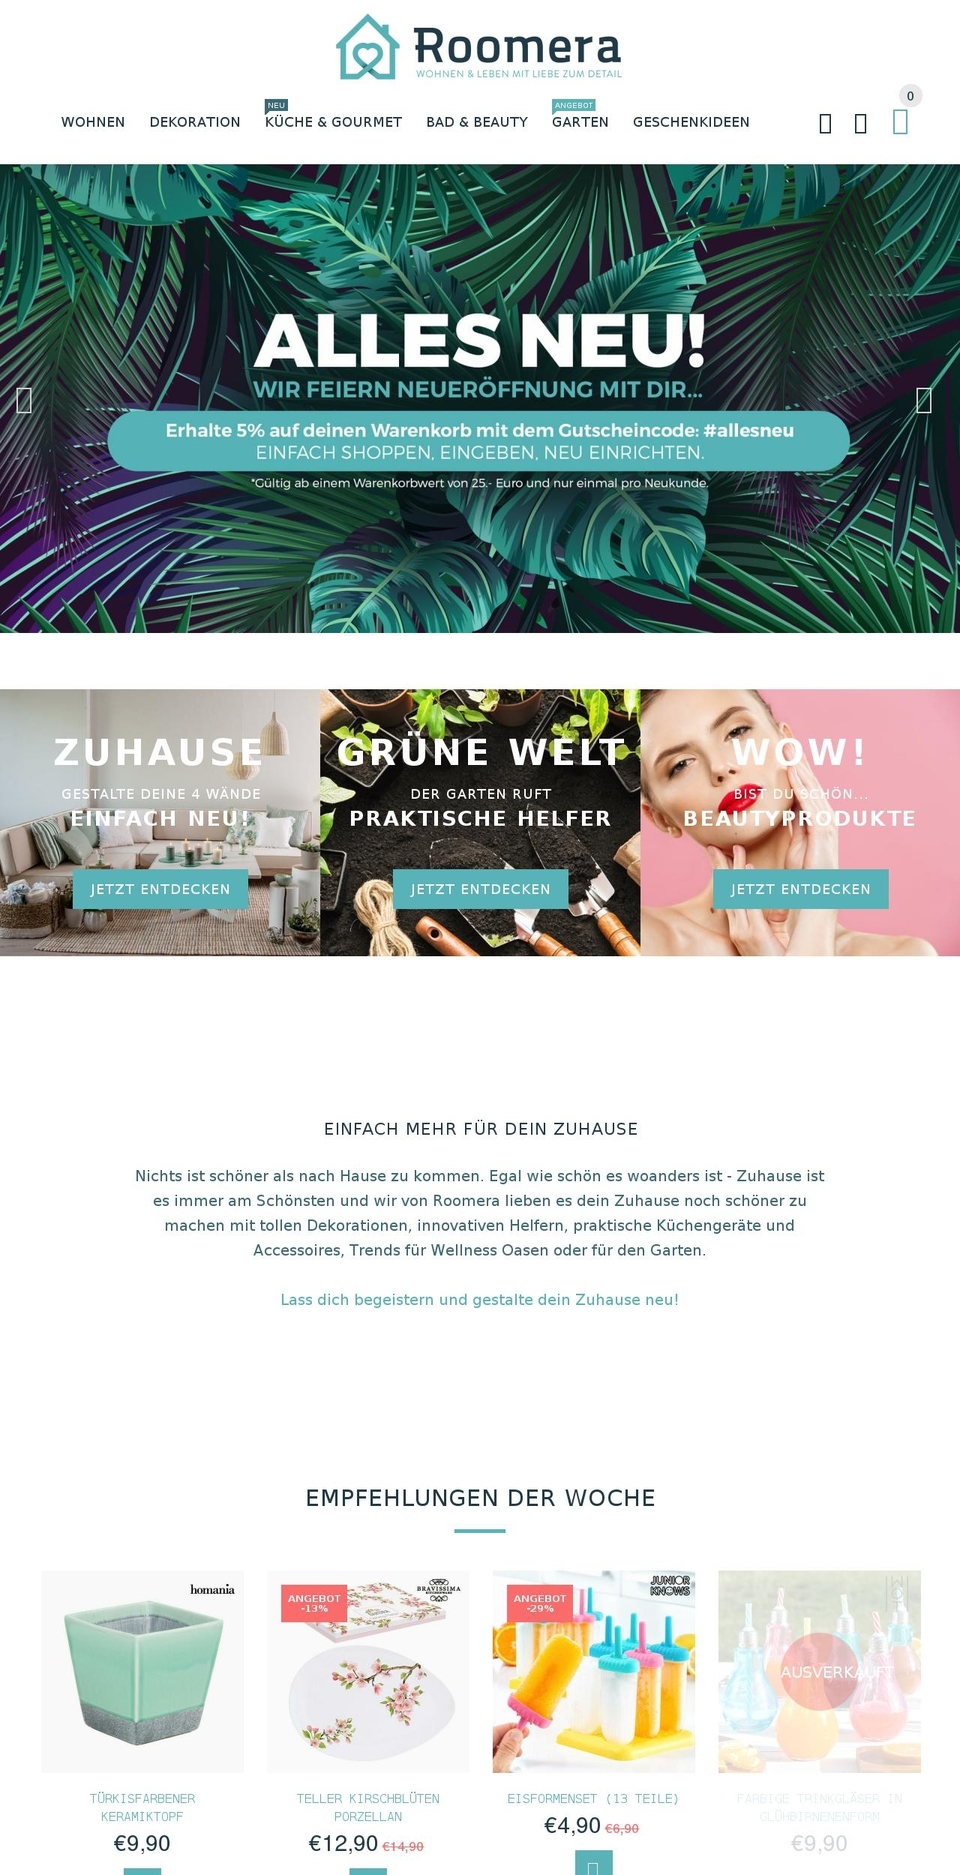 install-me-yourstore-v2-1-9 Shopify theme site example roomera.de